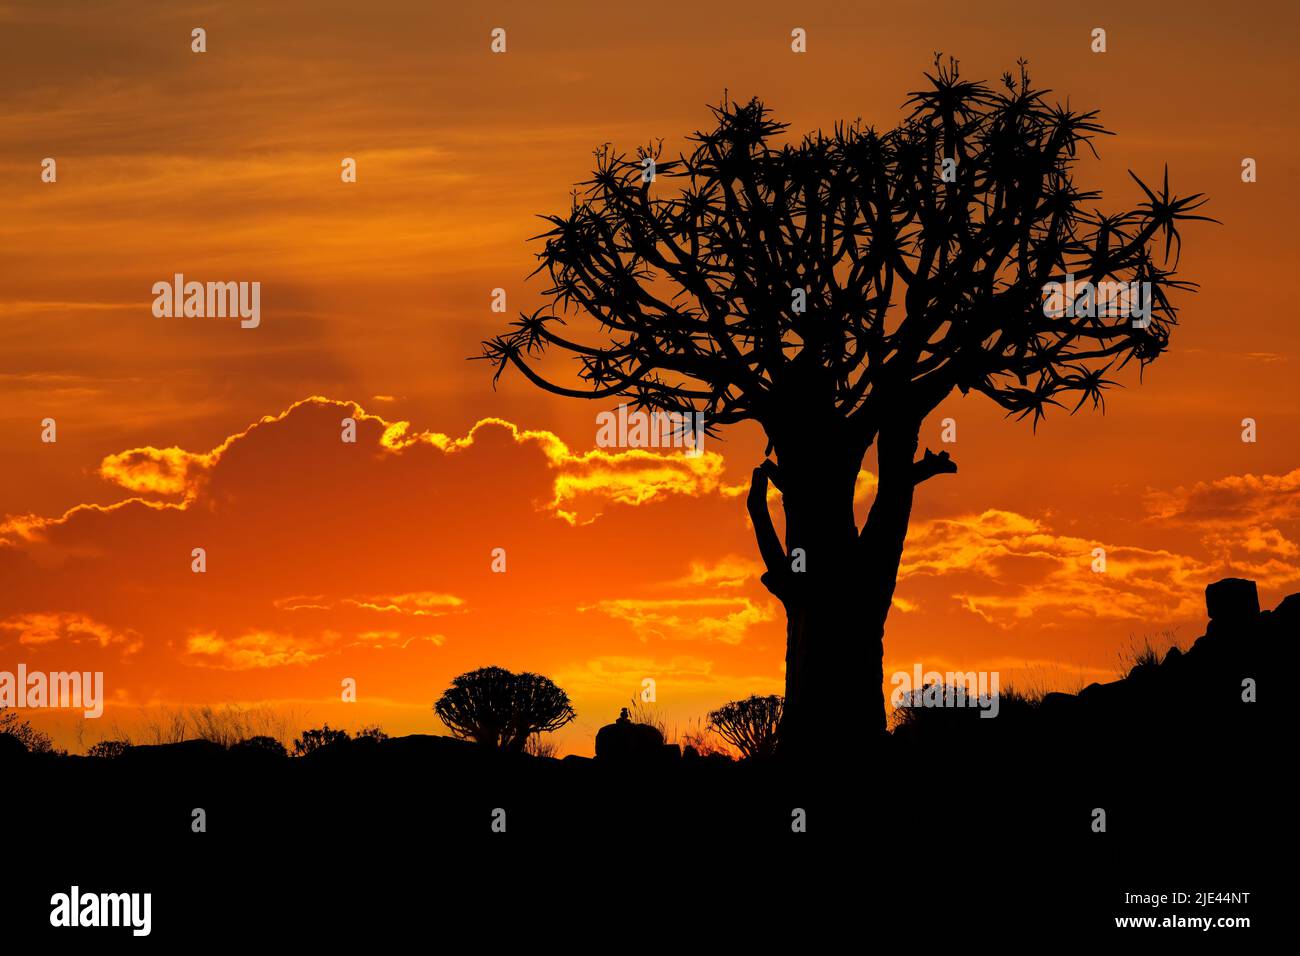 Silhouette of a quiver tree (Aloe dichotoma) at sunset, Namibia Stock Photo